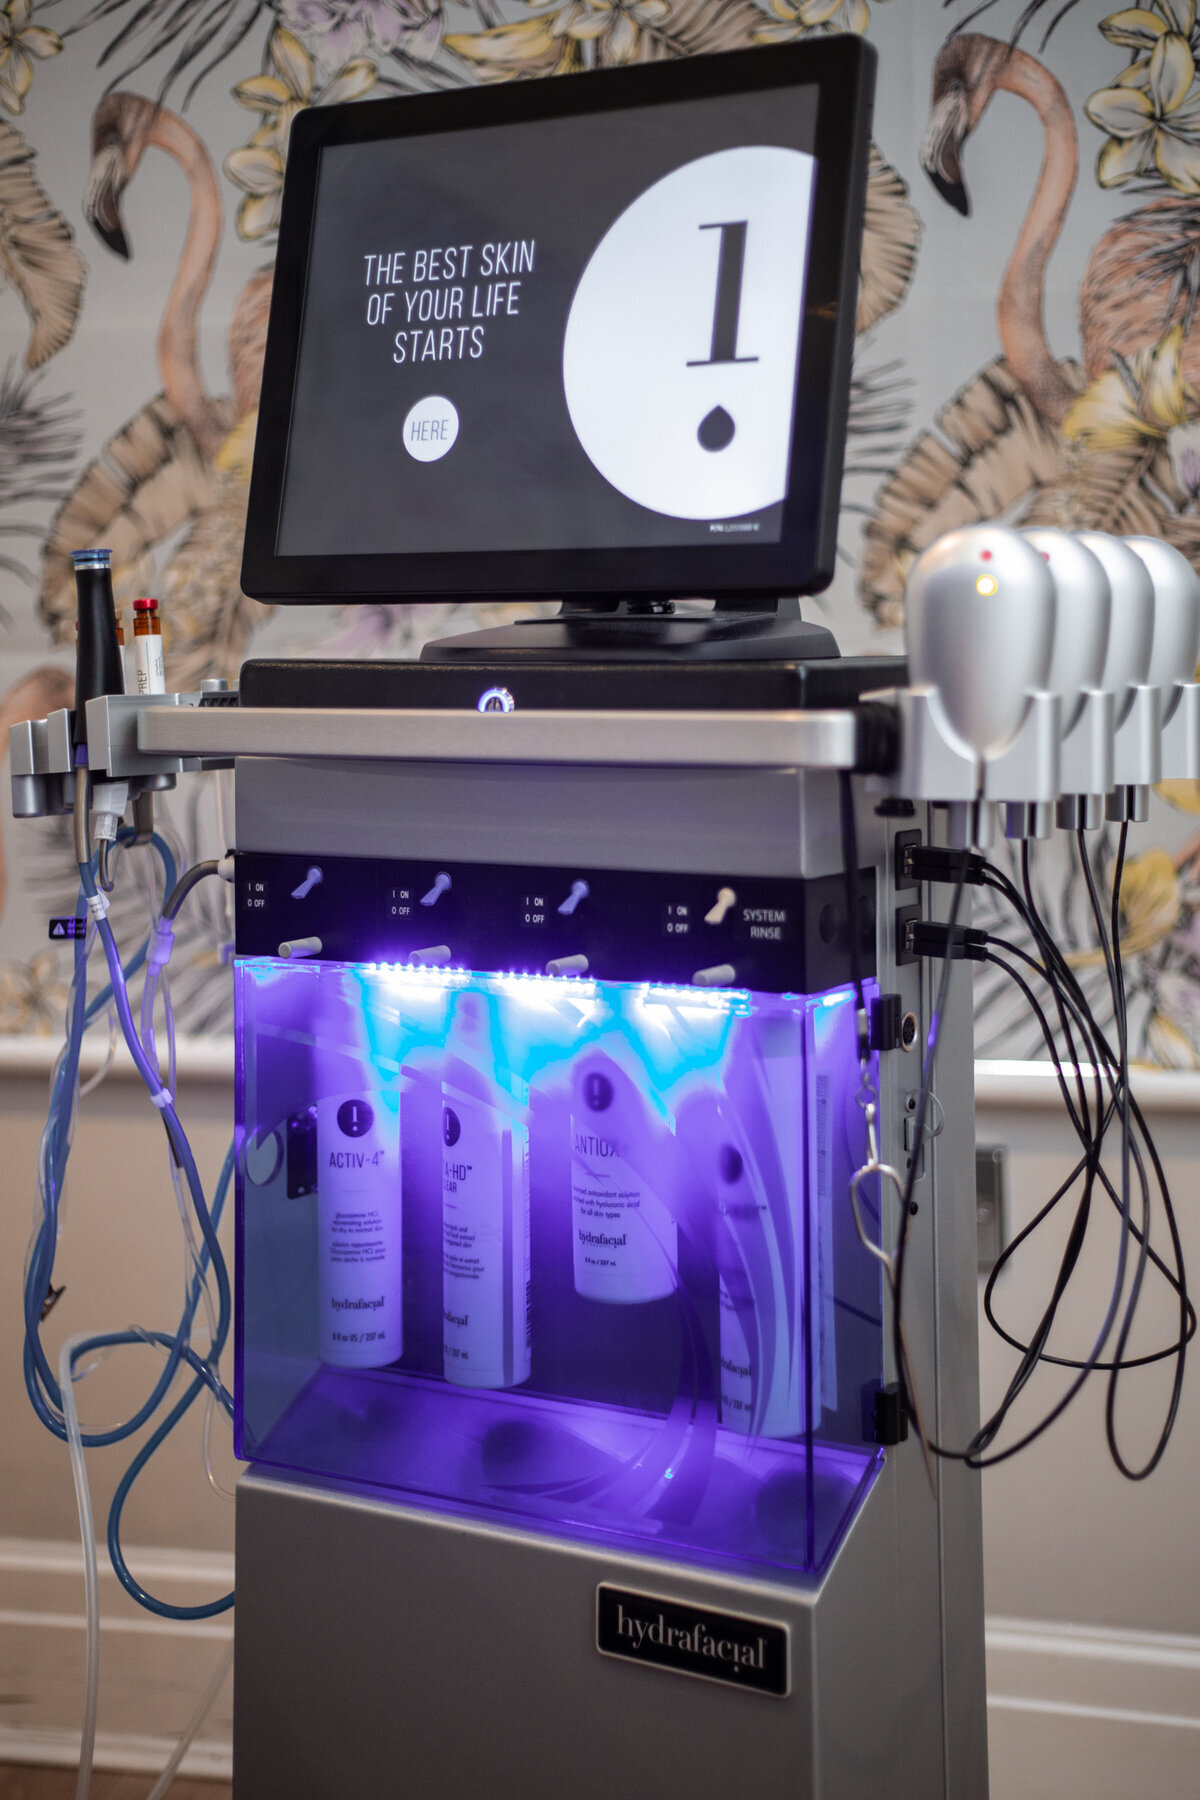 About - Hydrafacial equipment at Missy's Beauty Nantwich